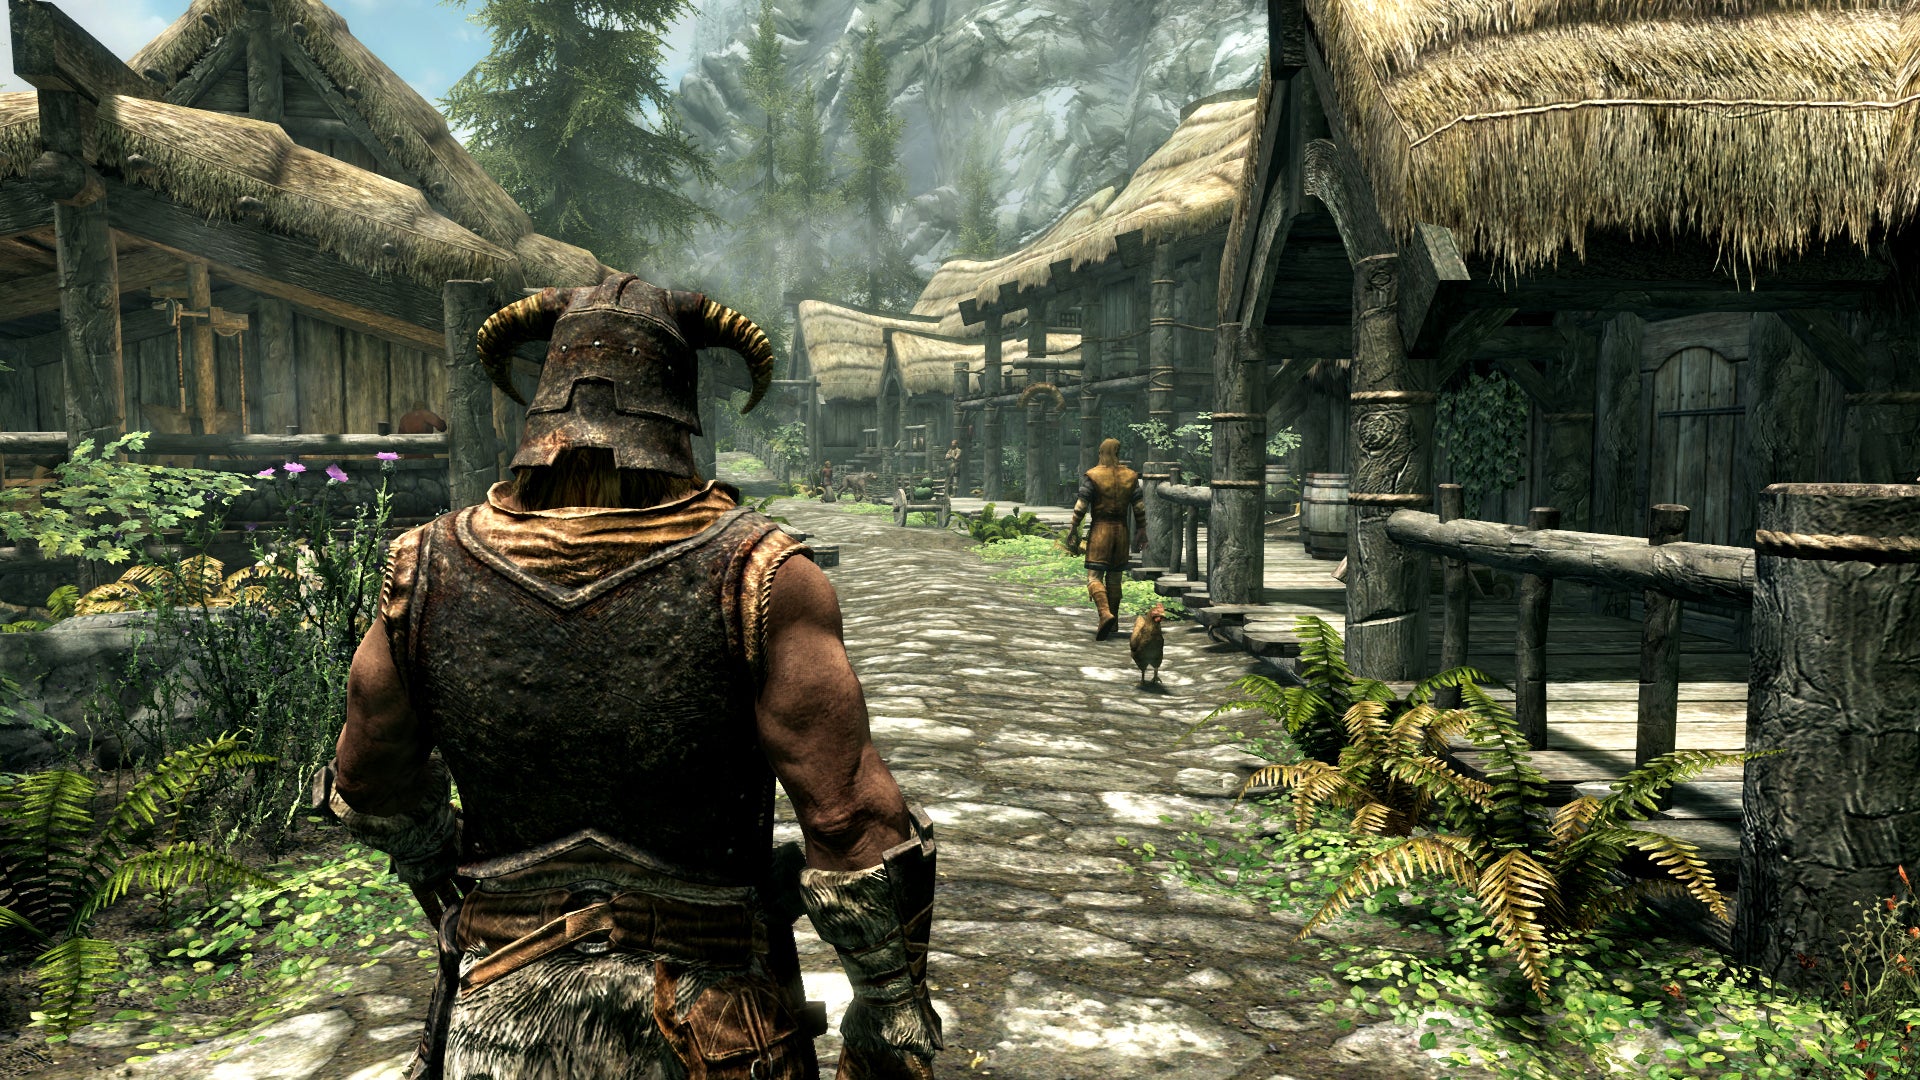 Skyrim mods space is 1GB PS4, but 5GB on Xbox One |